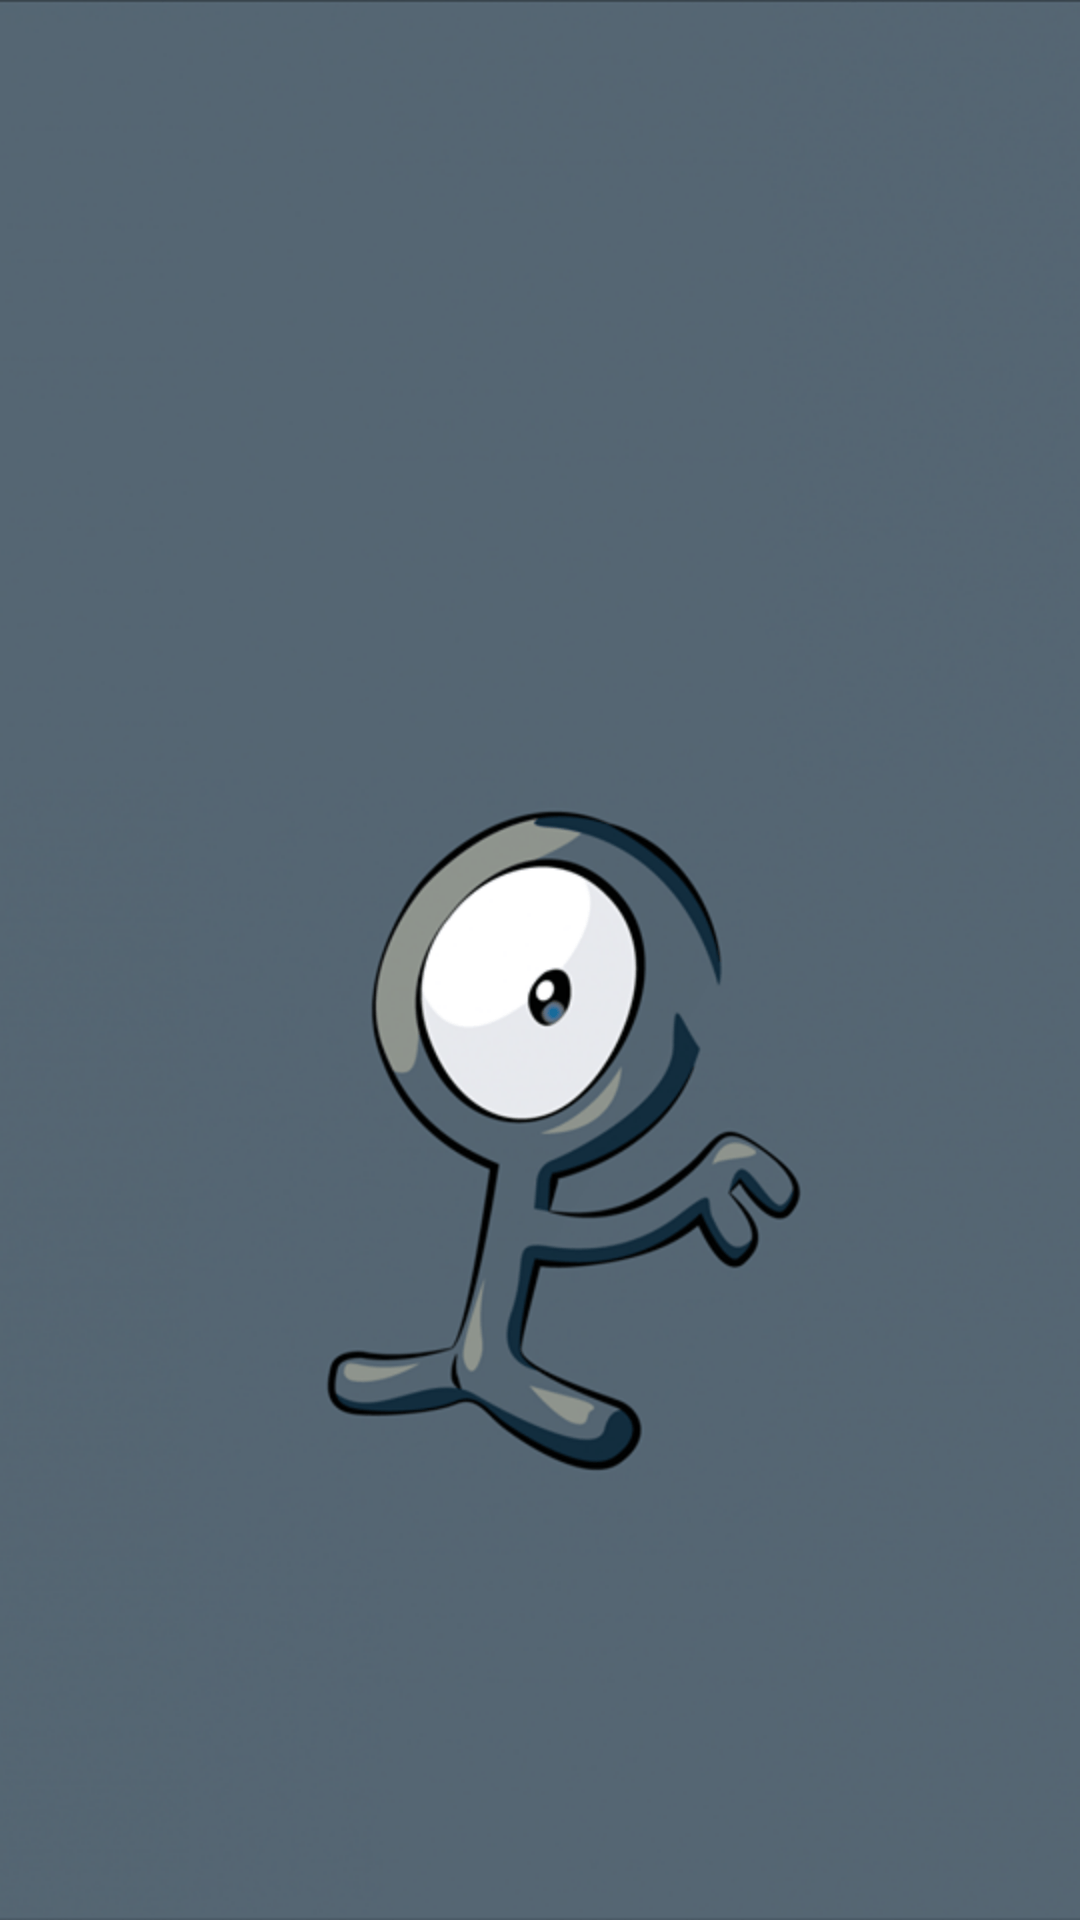 Unown to see more of the cutest Pokemon wallpaper